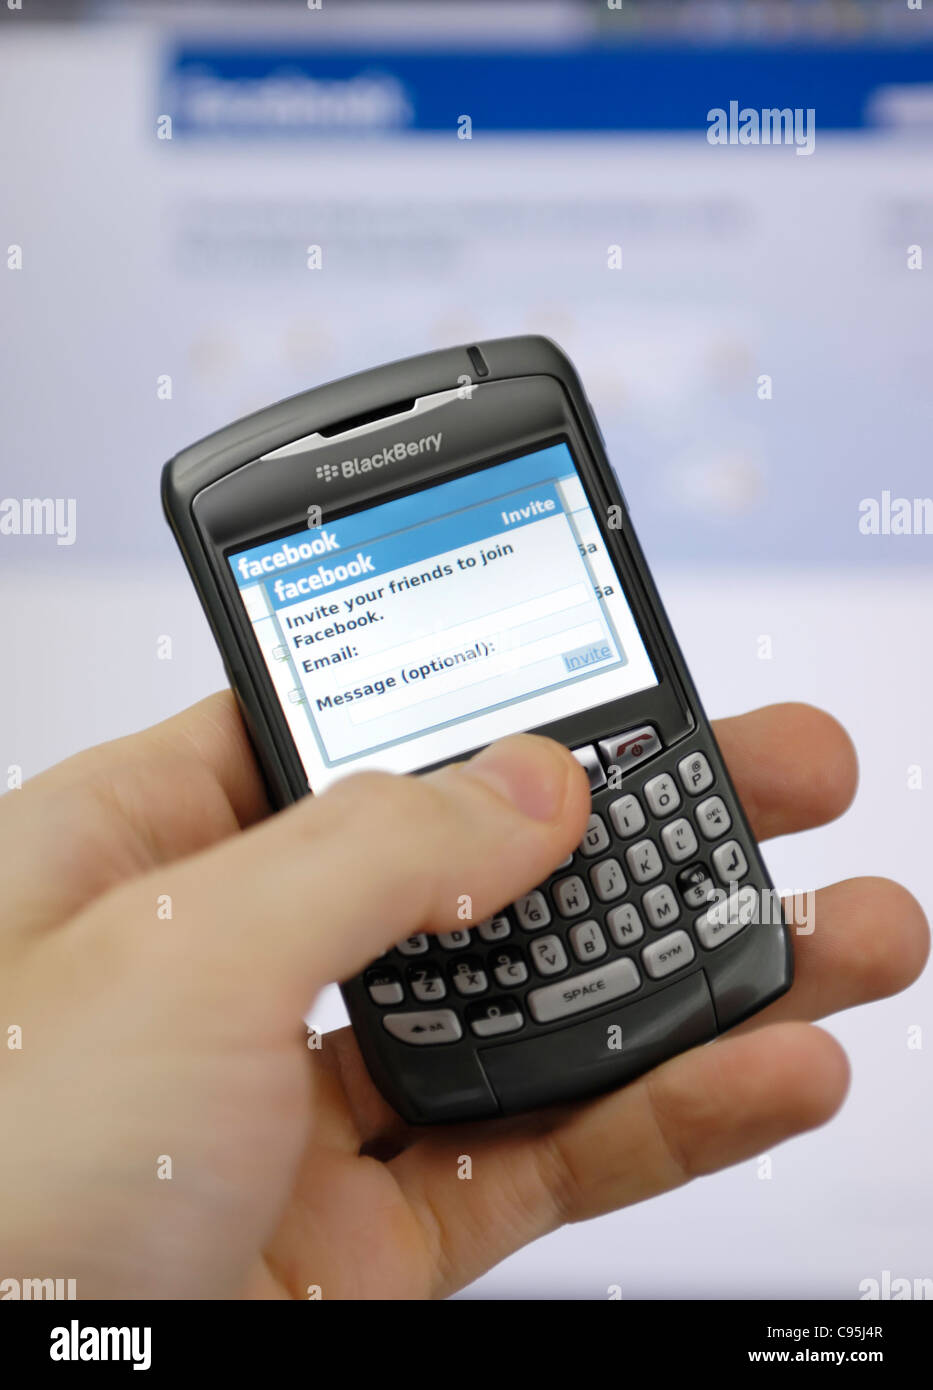 Facebook invitation screen on a display of Blackberry smartphone Stock Photo